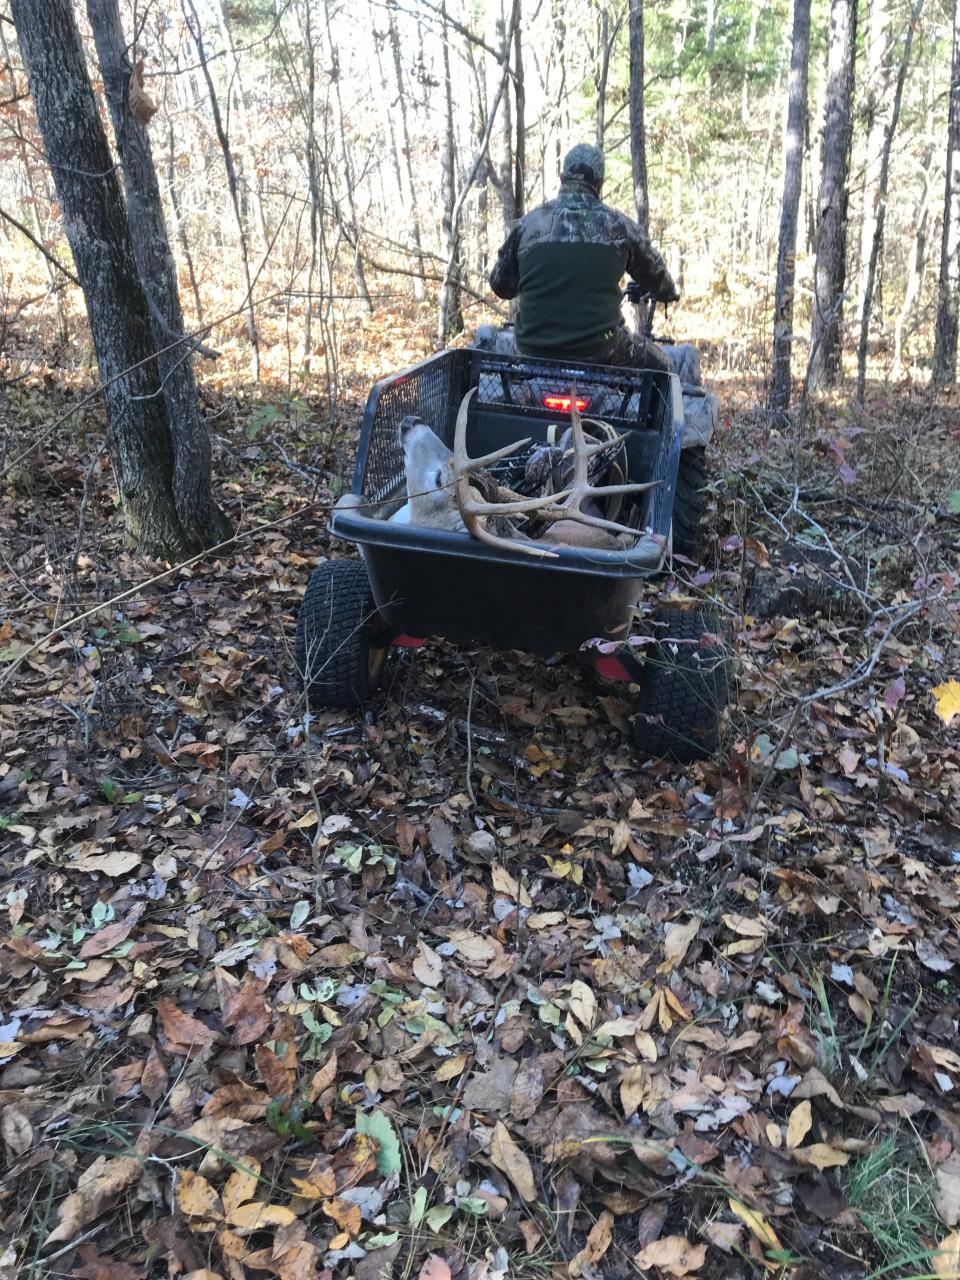 Four-wheelers outfitted with the right accessories are excellent hunting vehicles.